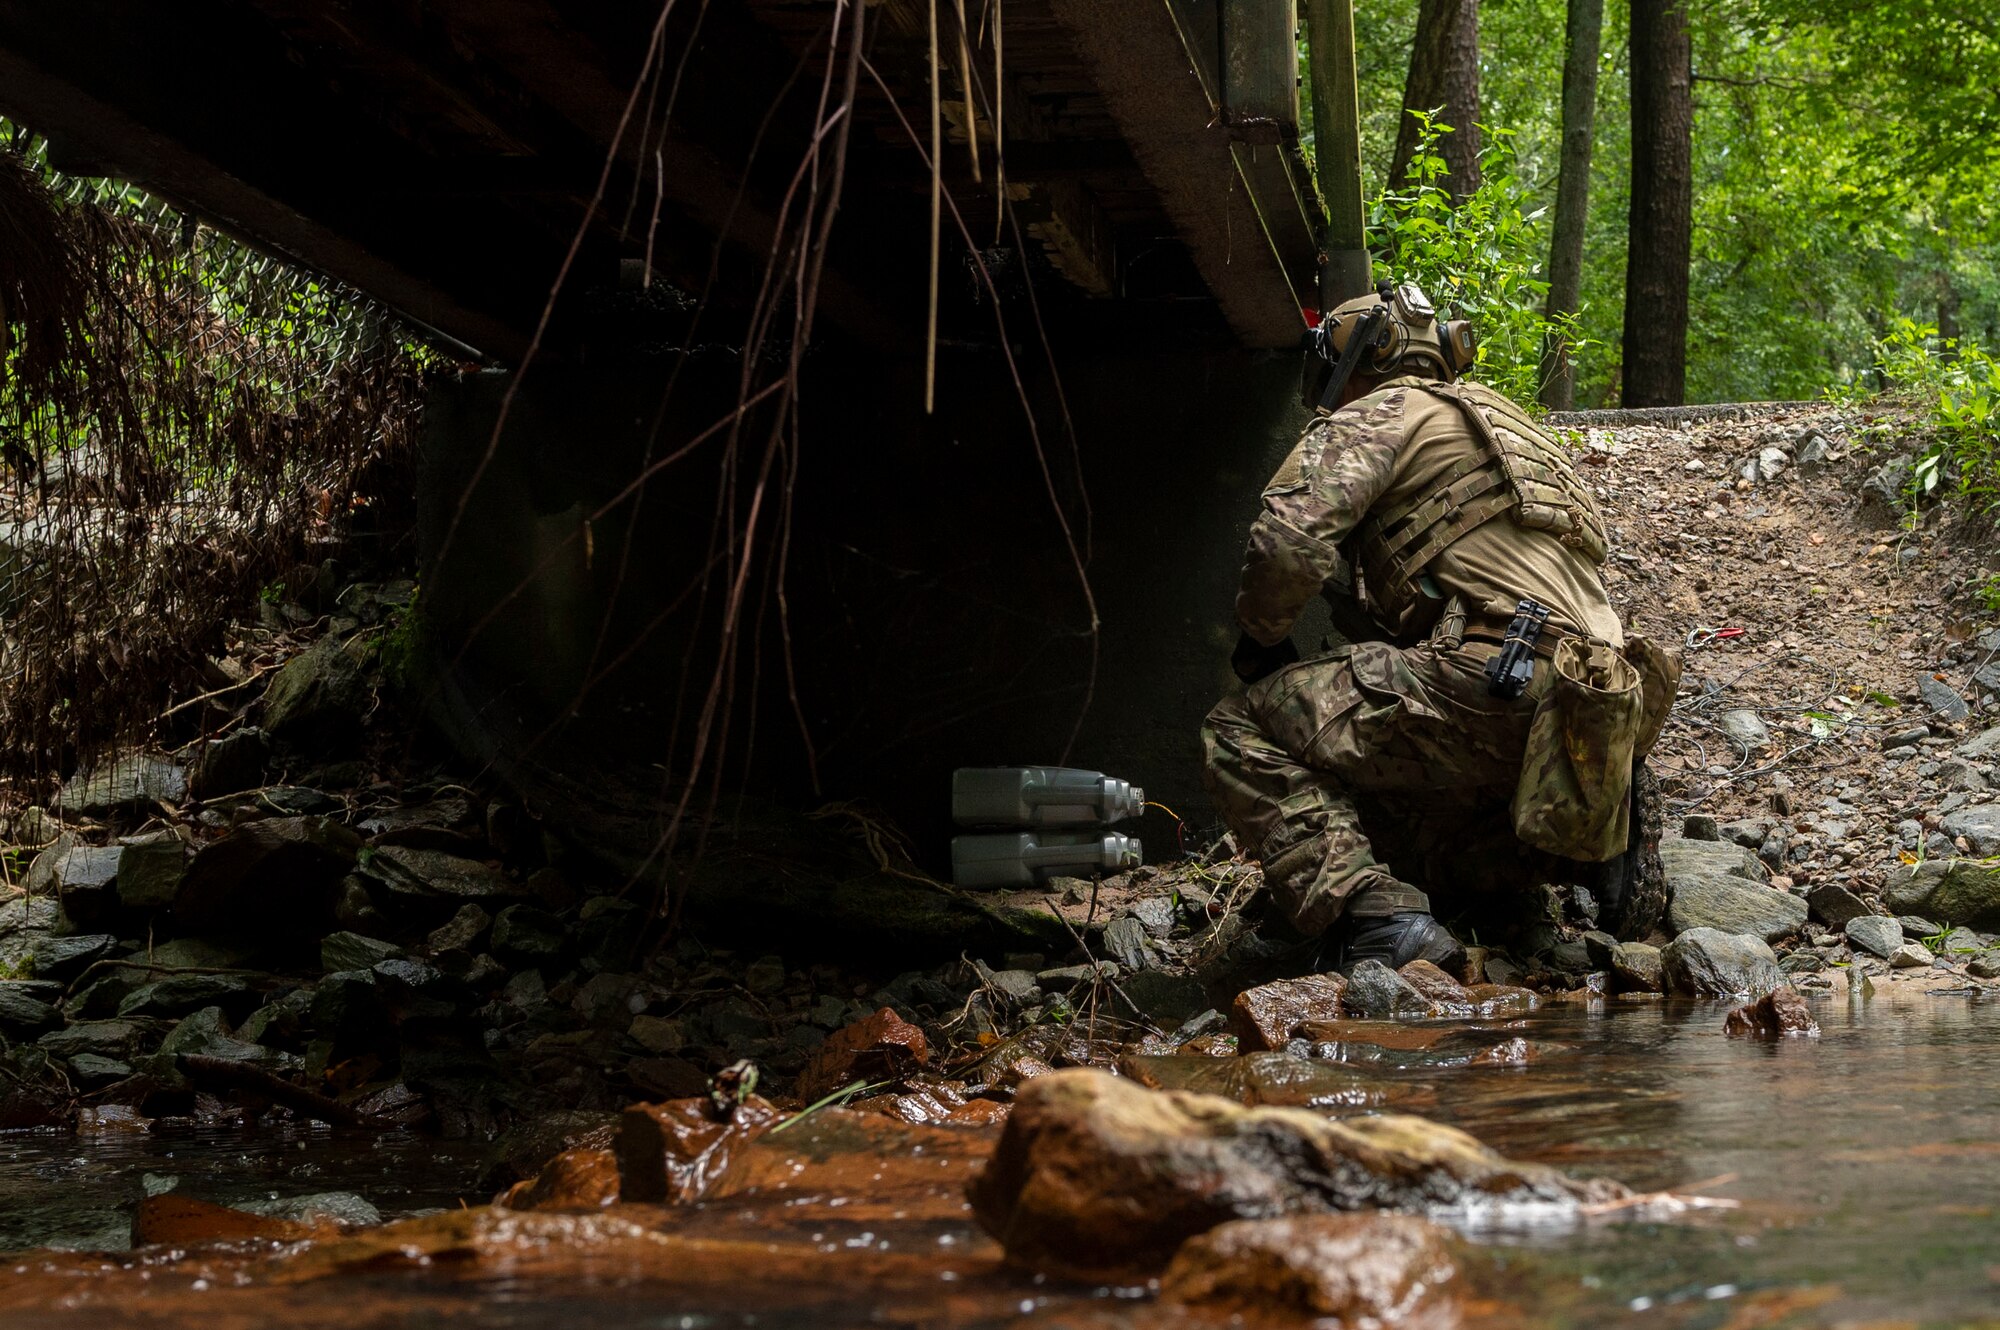 Staff Sgt. Damian Riley, 4th Civil Engineer Squadron explosive ordnance disposal technician, hooks up a remote cut and pull on a simulated improvised explosive device during field training exercise Operation Guillotine at Seymour Johnson Air Force Base, North Carolina, July 26, 2021.